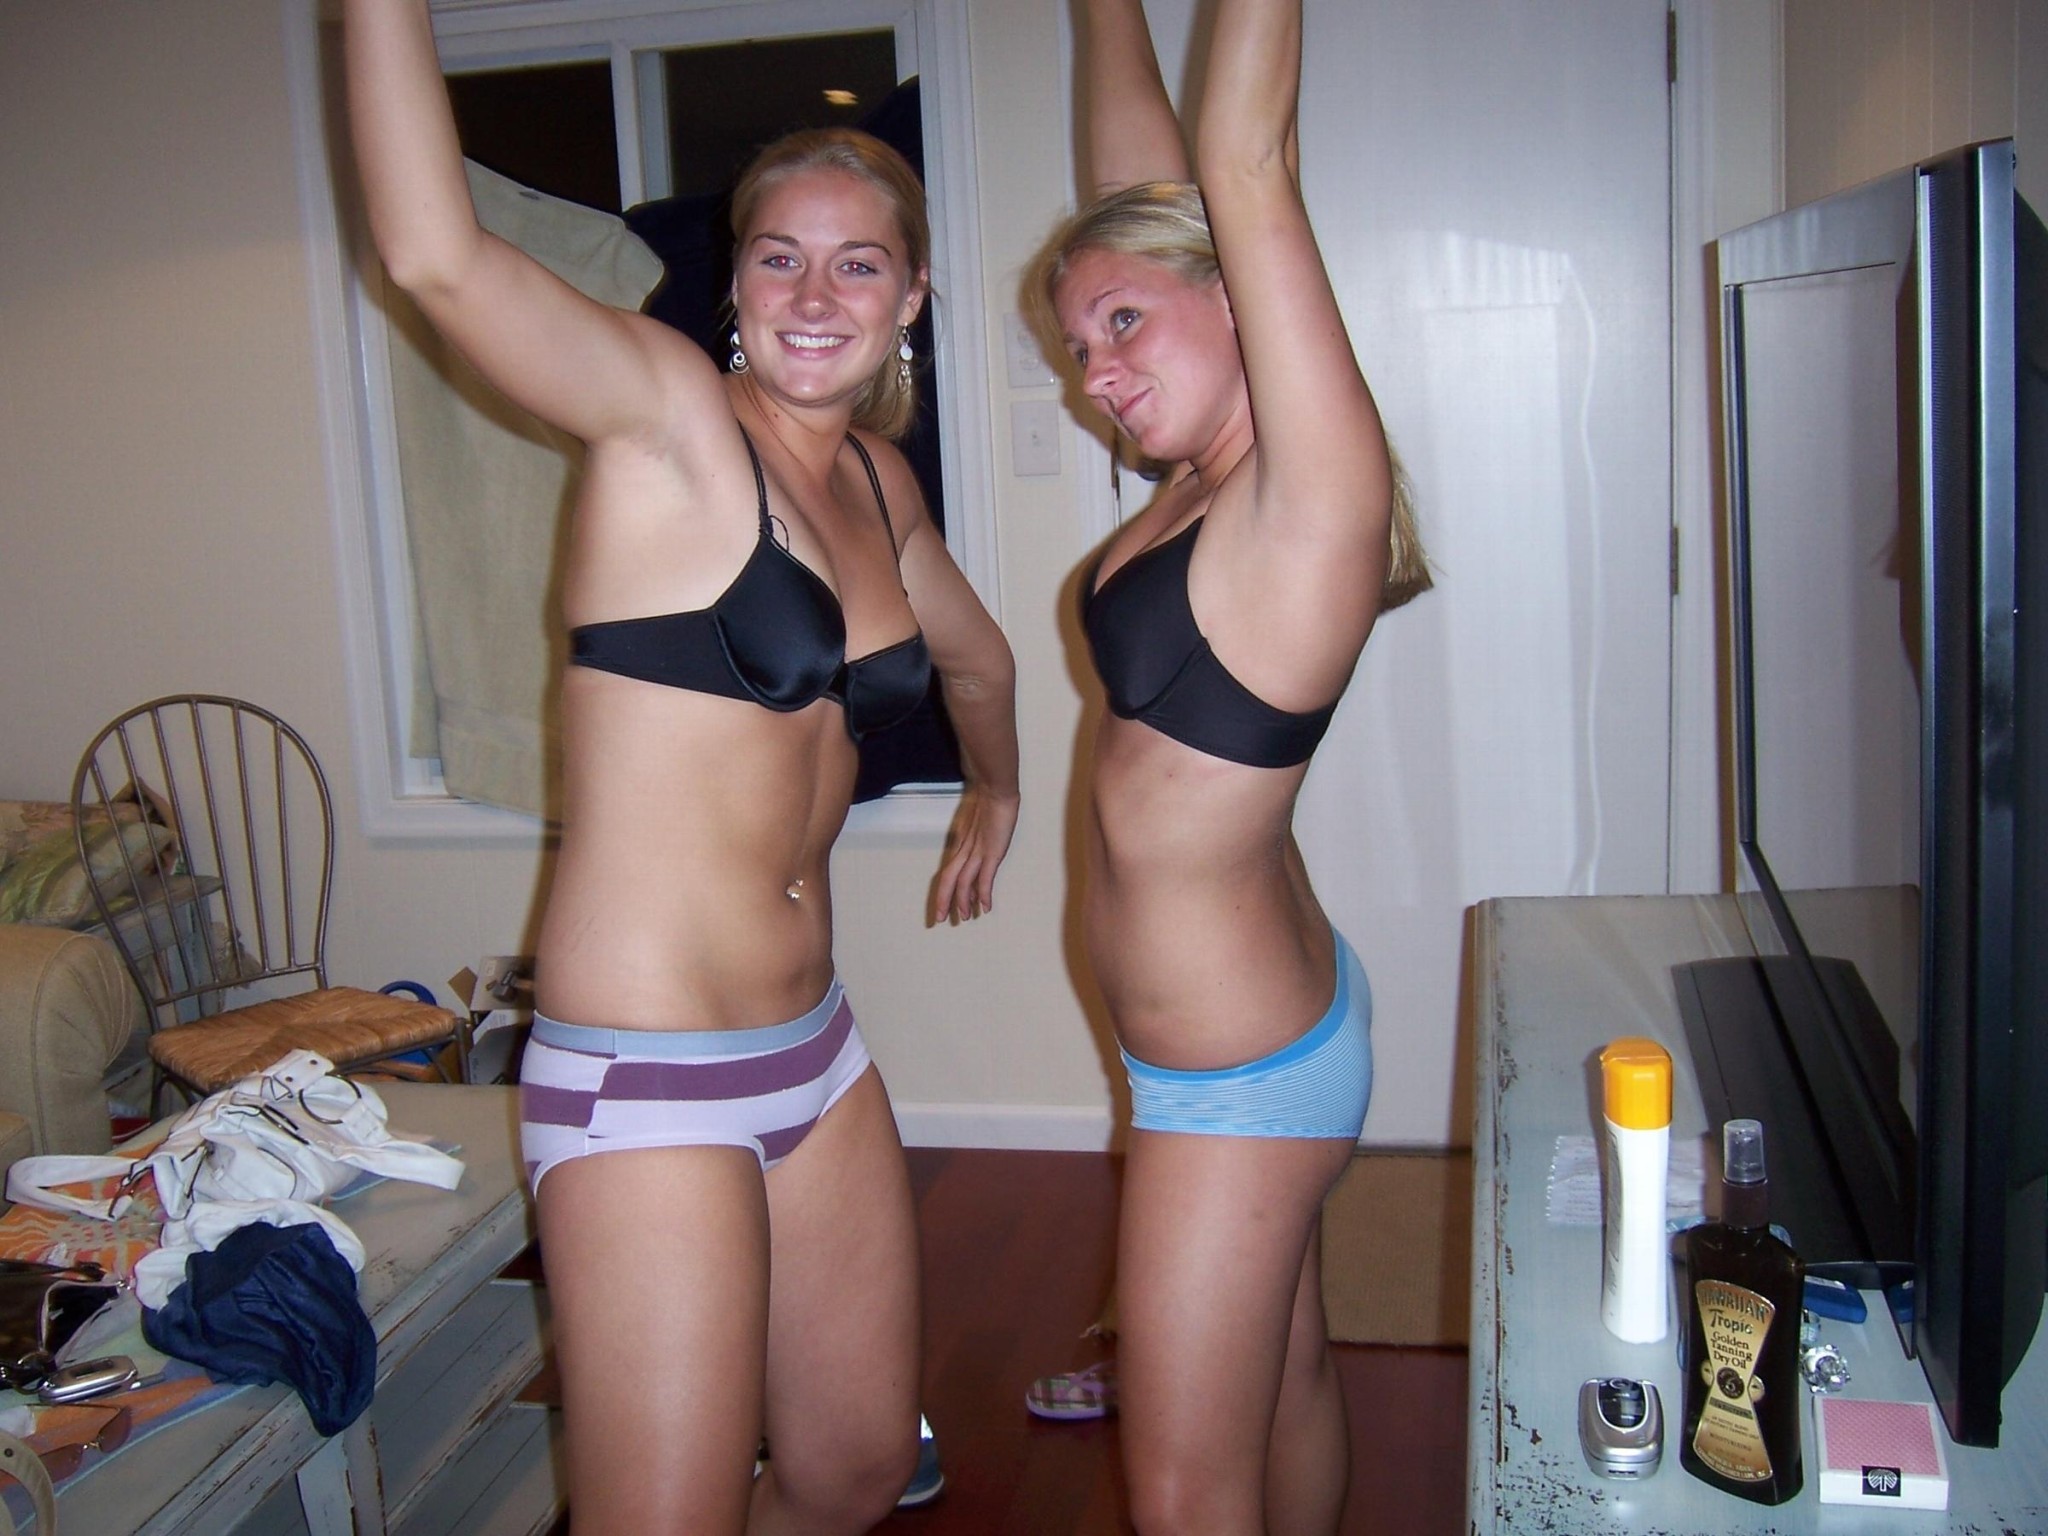 Random pics of college hotties wasted and flashing their underwear at parties #76398267